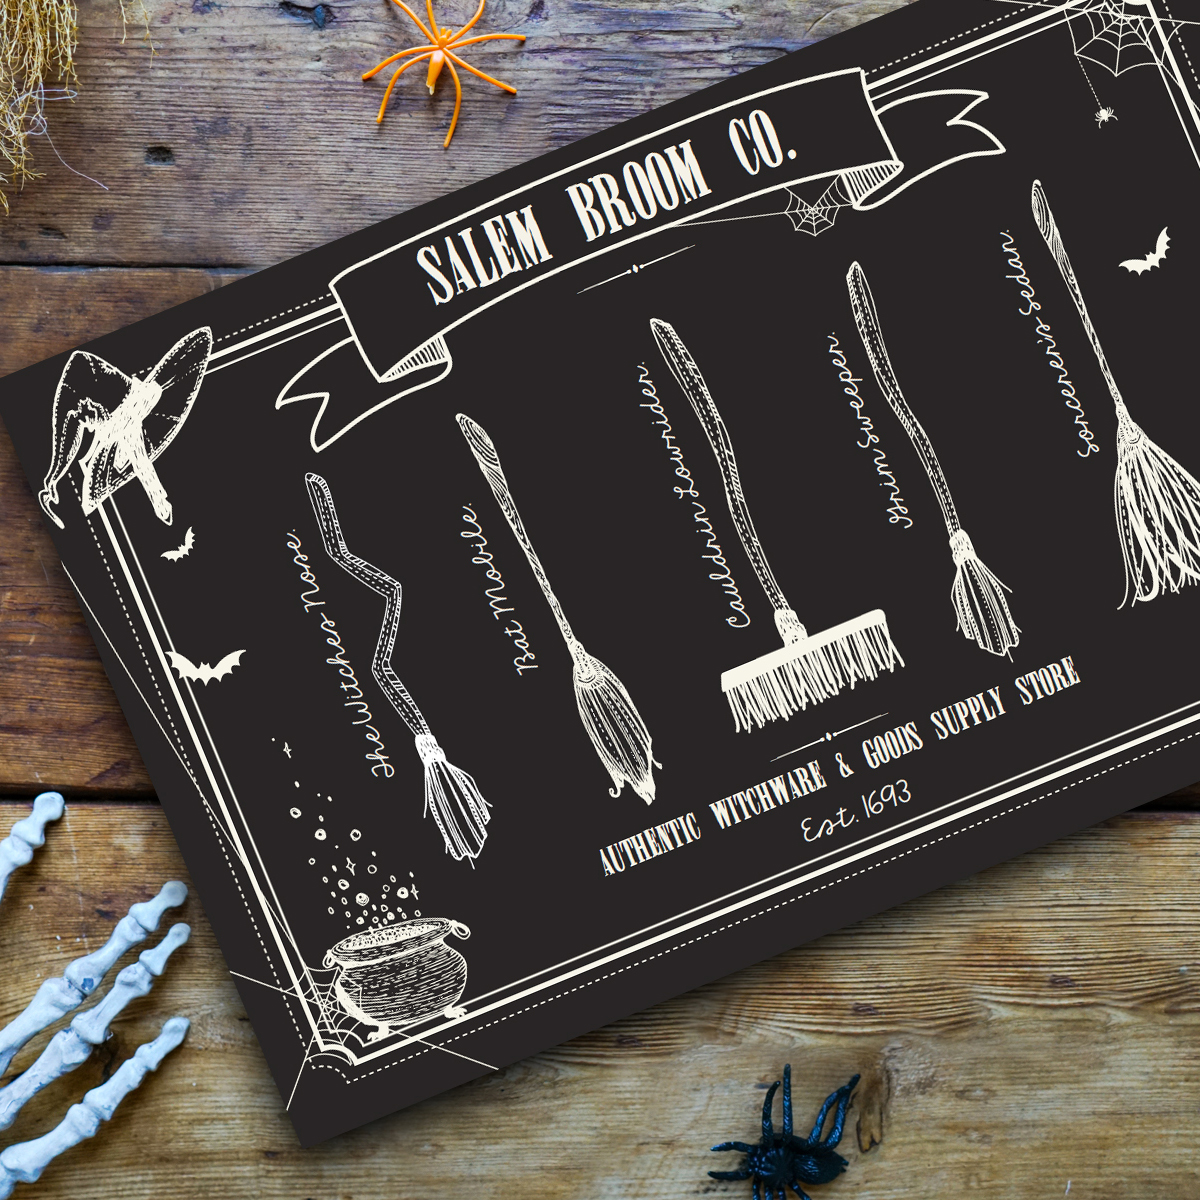 Fabulous witch's broom poster decor for Halloween!